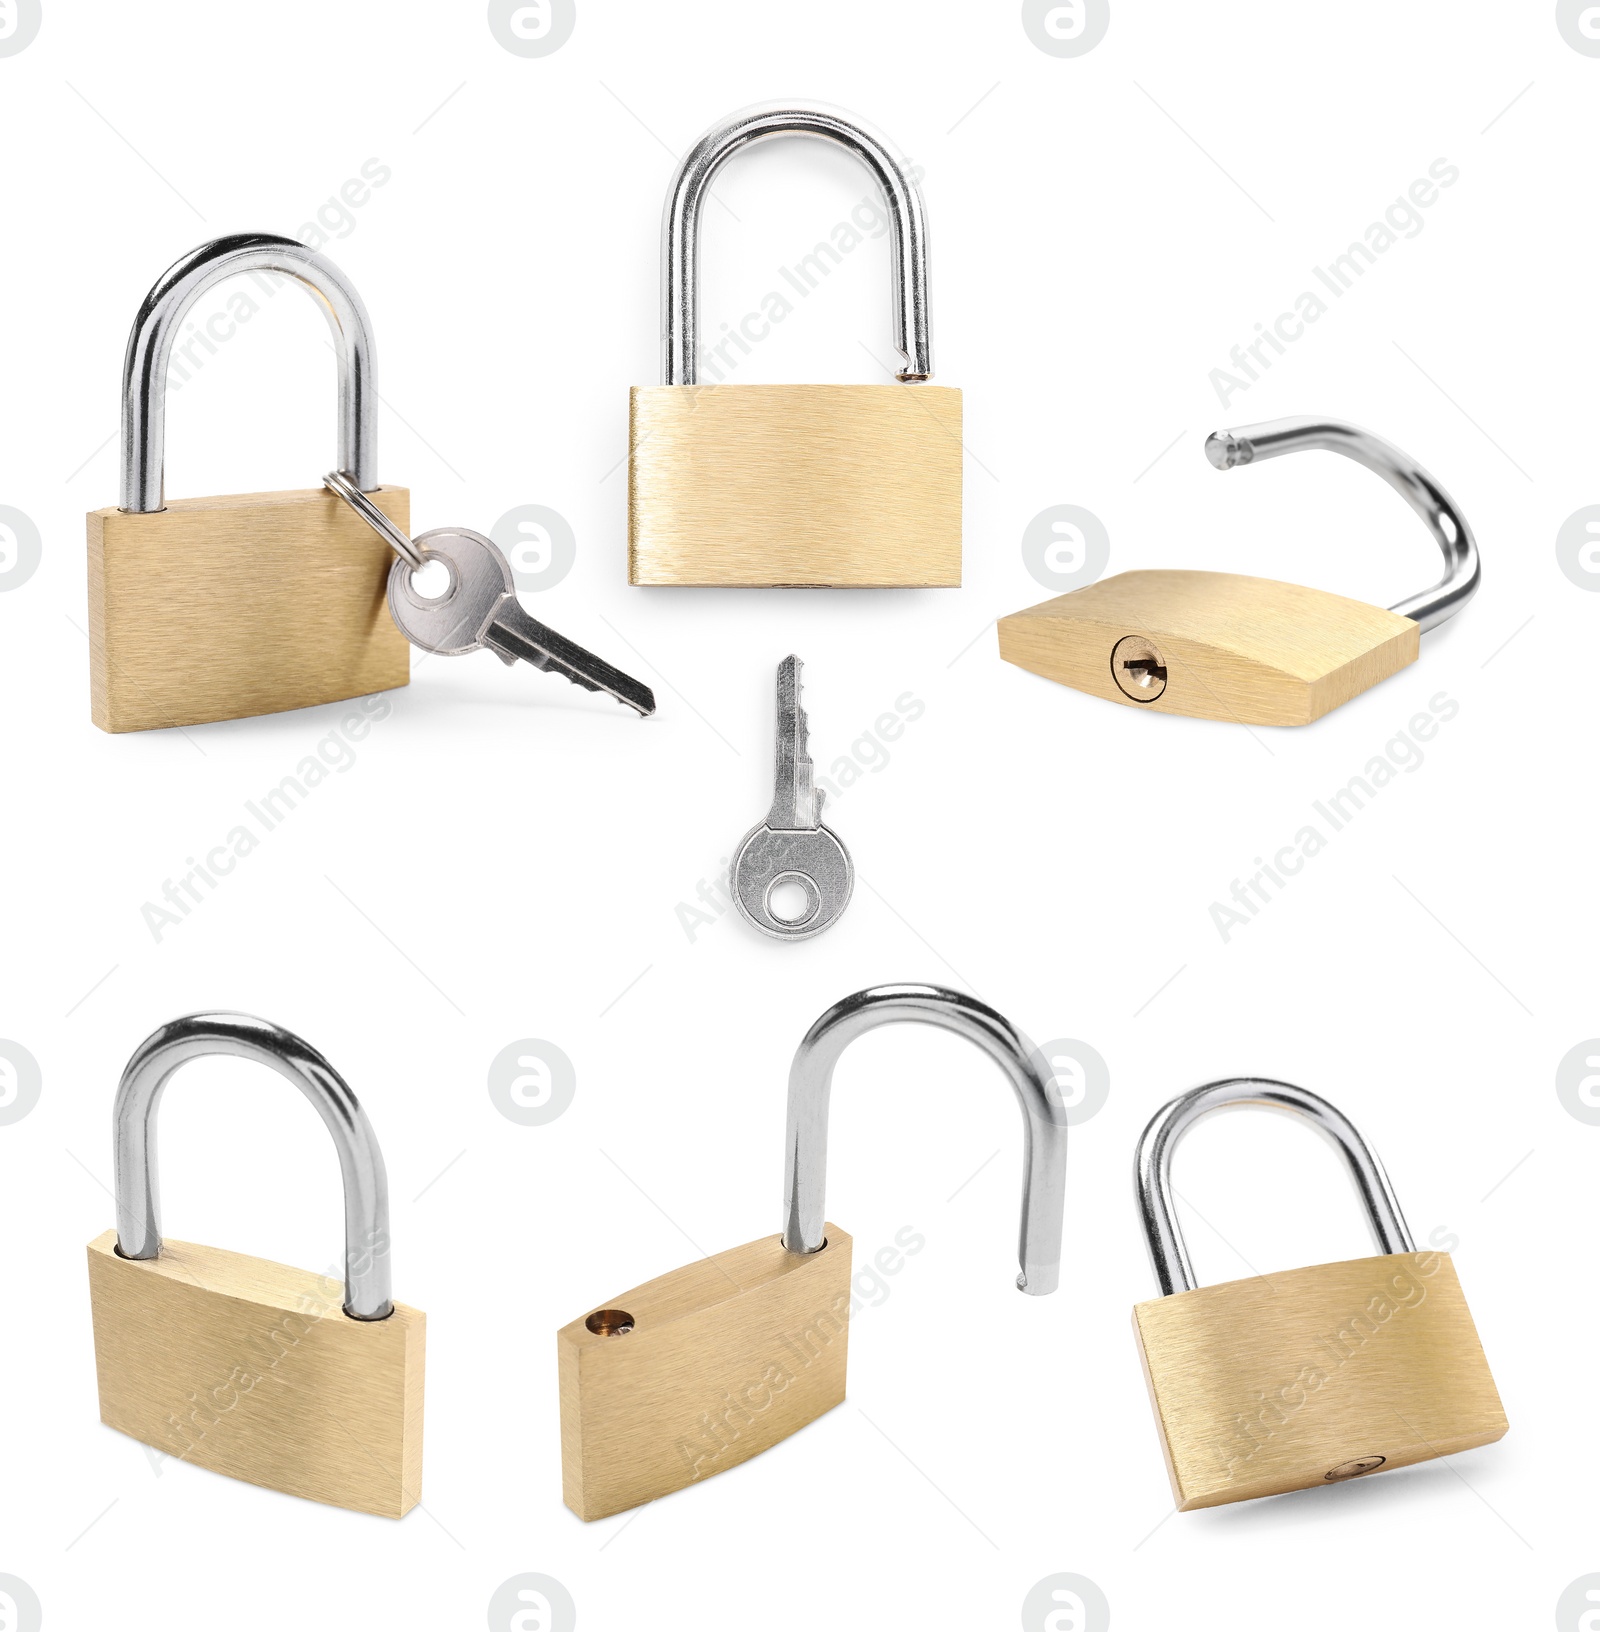 Image of Steel padlock isolated on white, different sides. Set